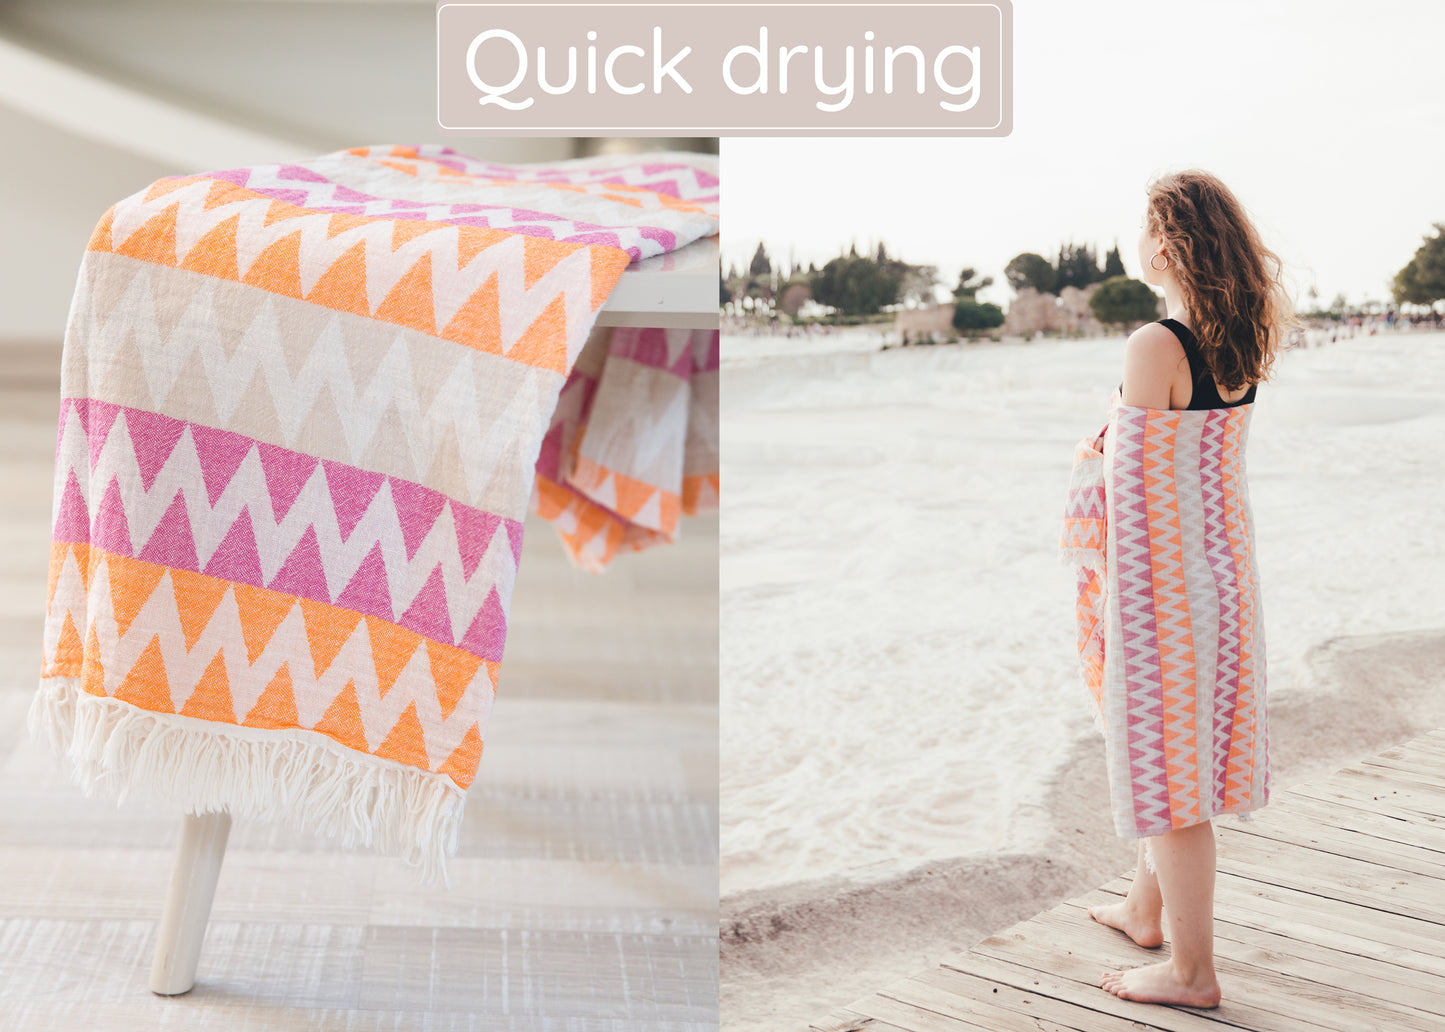 Grey Orange Red Turkish Beach Towel (35”x67”)  Lightweight, Quick drying and Sand Free Can be Used as Beach Blanket 100% Cotton ZigZag Design